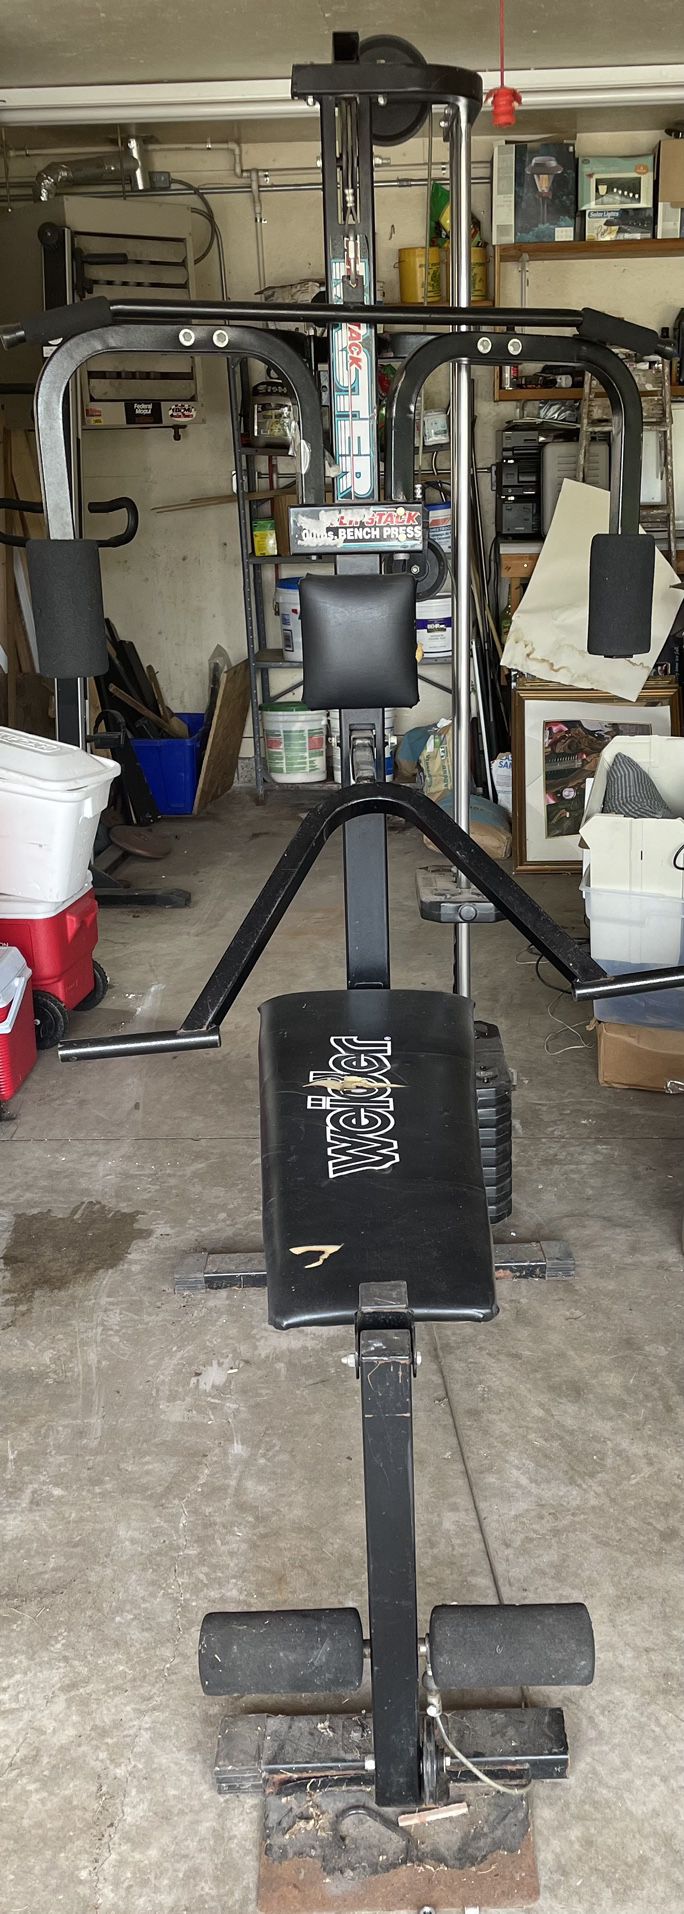 Gym exercise equipment weight bench and climber $100ea or best offer